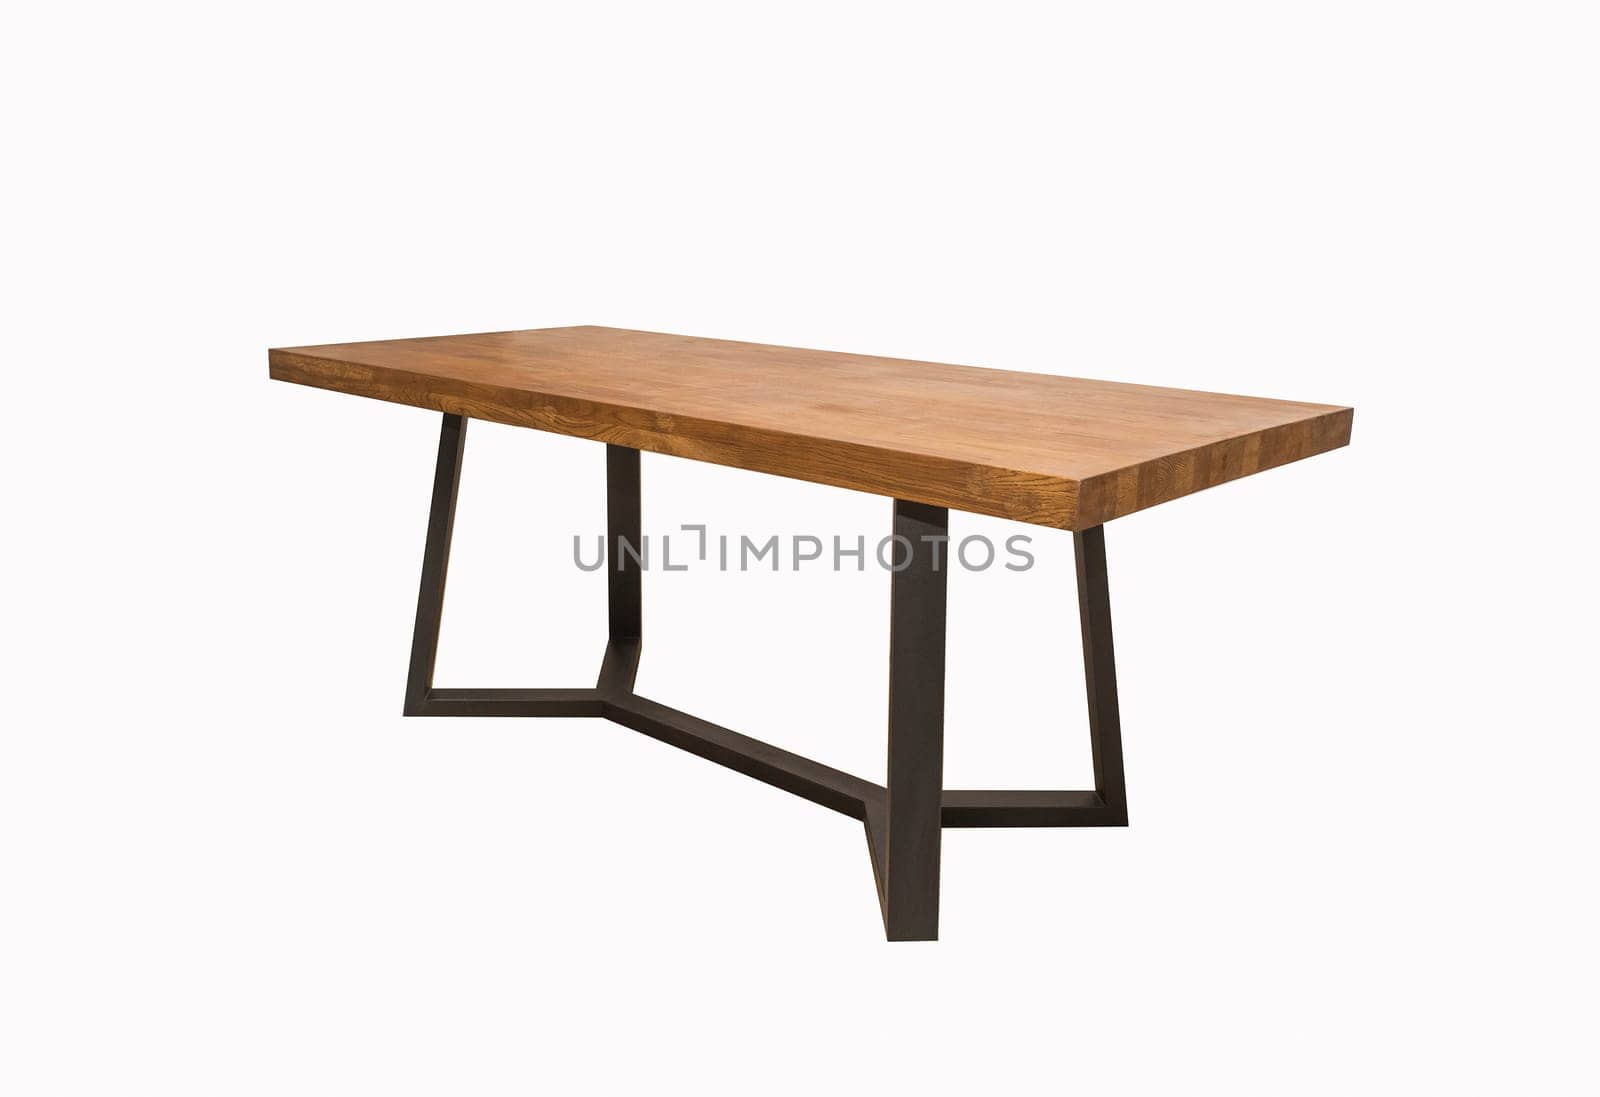 wooden table with black metal legs on white background at an angle of 45 degrees